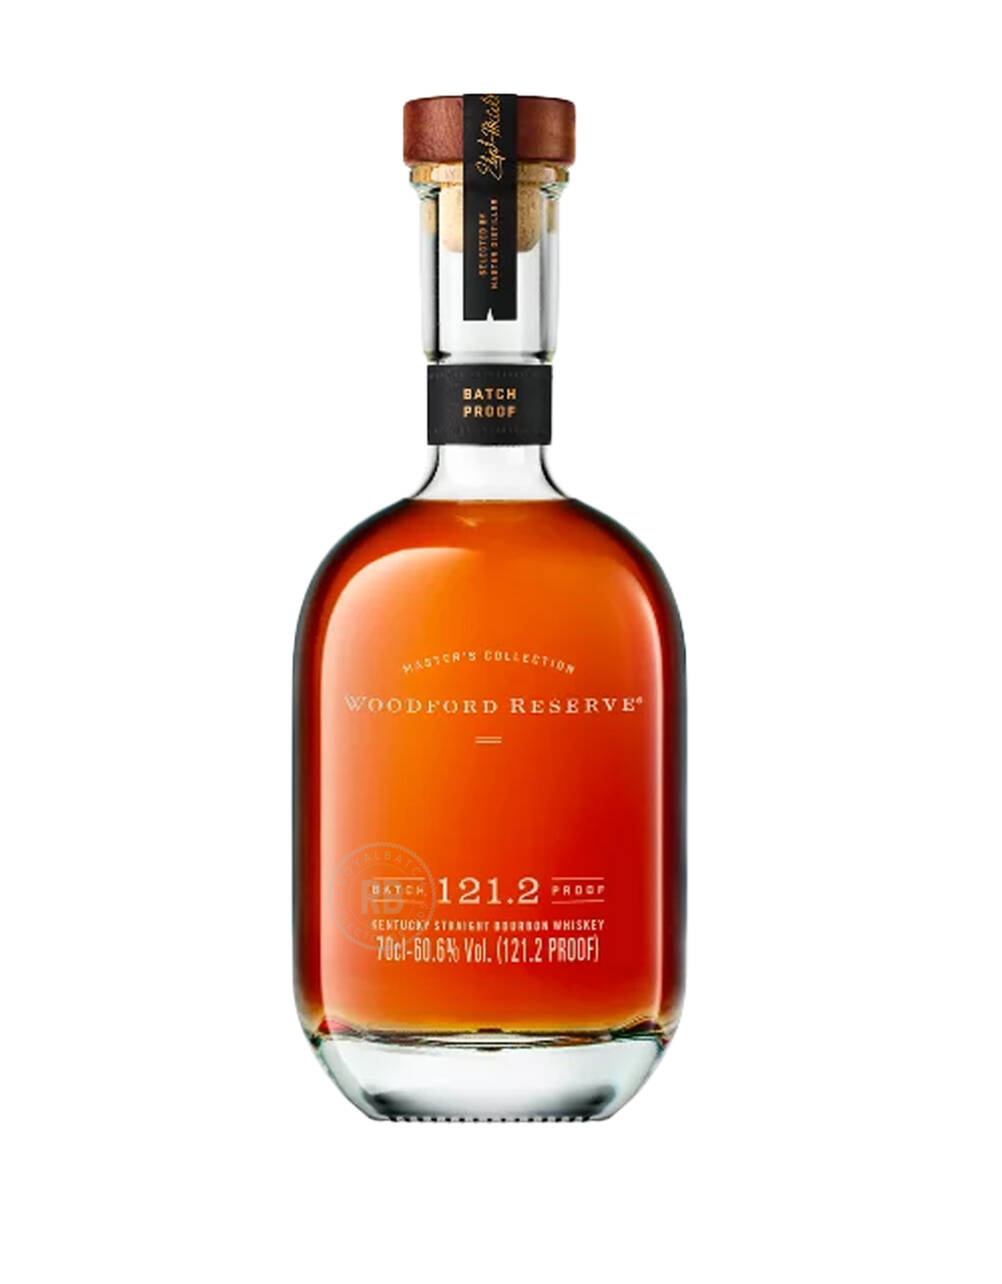 Woodford Reserve Batch Proof 121.2 Bourbon Whiskey